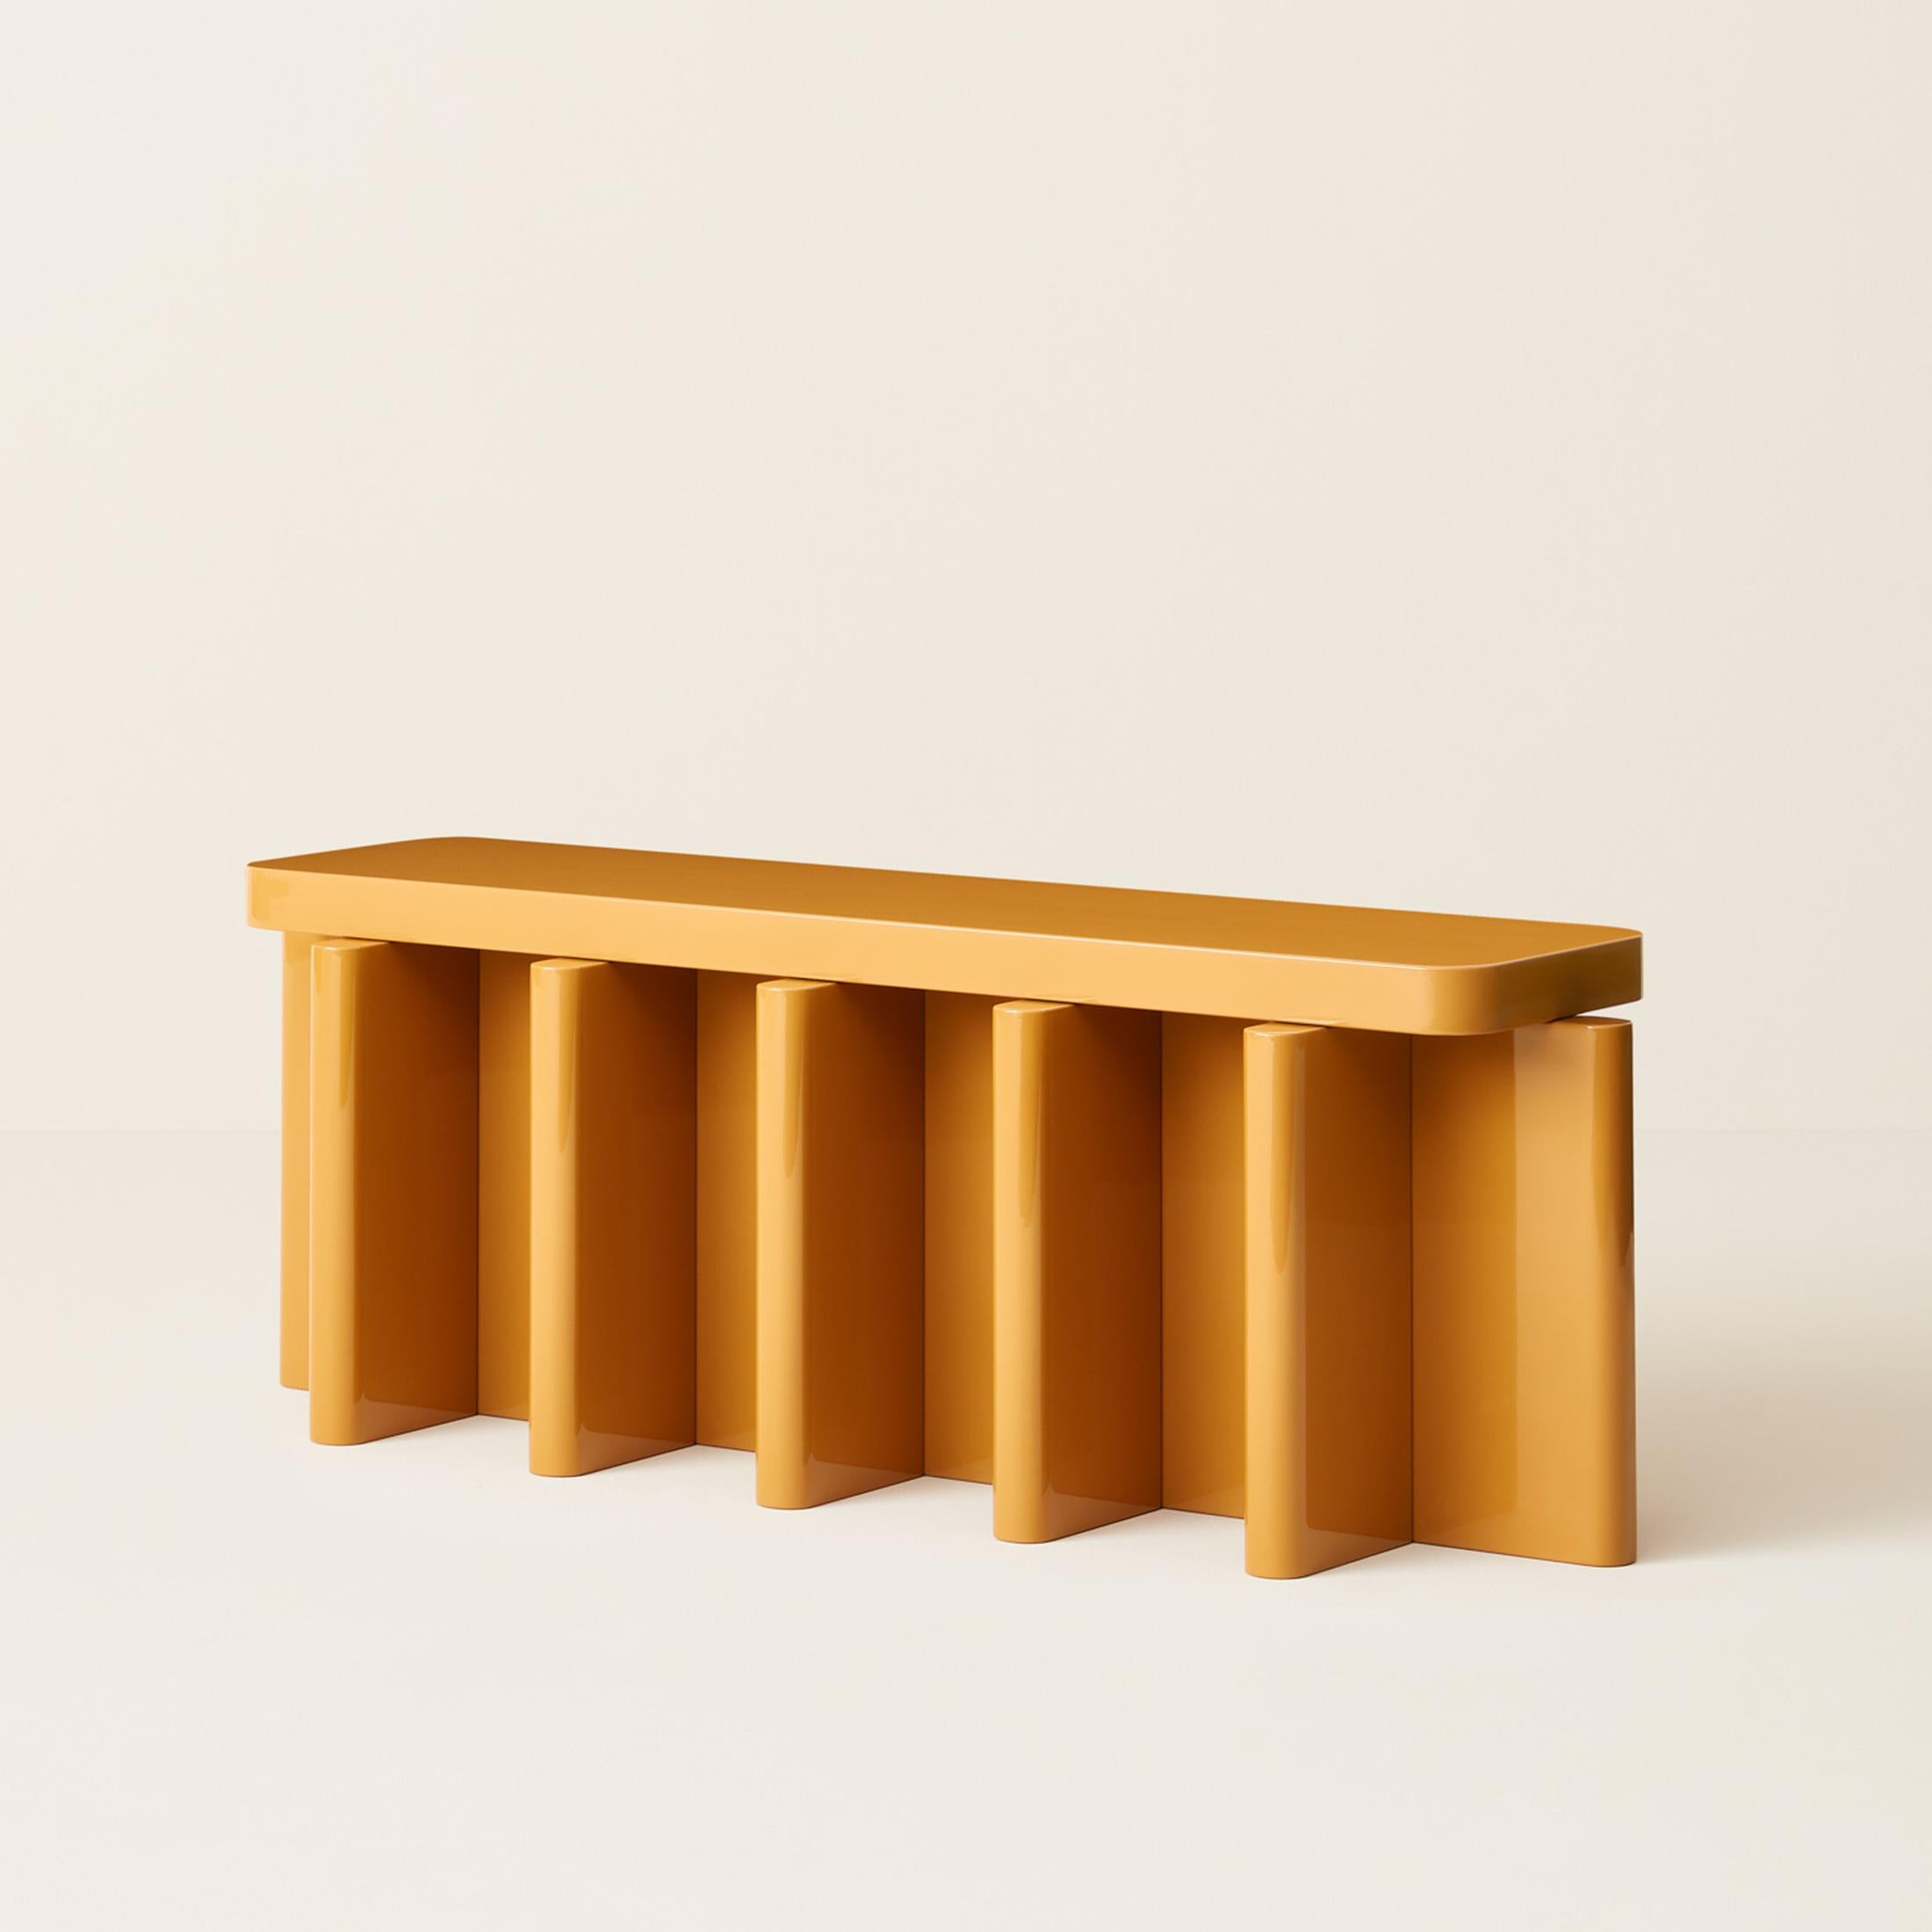 Italian Spina Table in Lac Wood Caramel 5 Edit by Portego For Sale